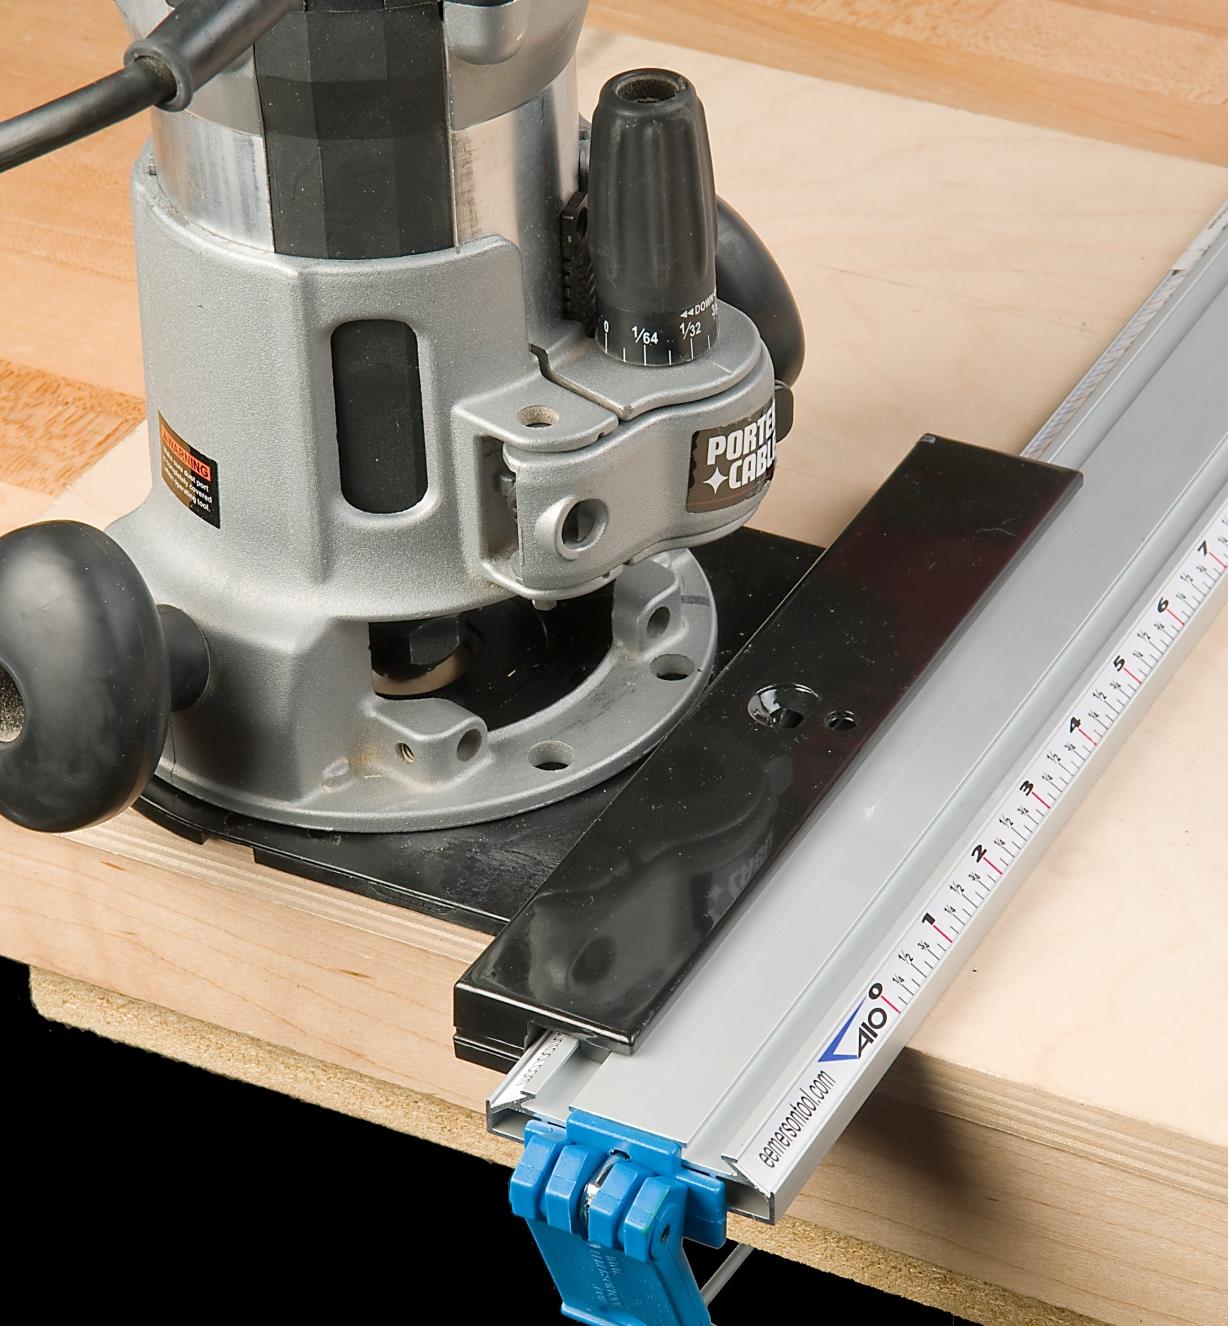 Low-profile tool guide in use with a router plate and router